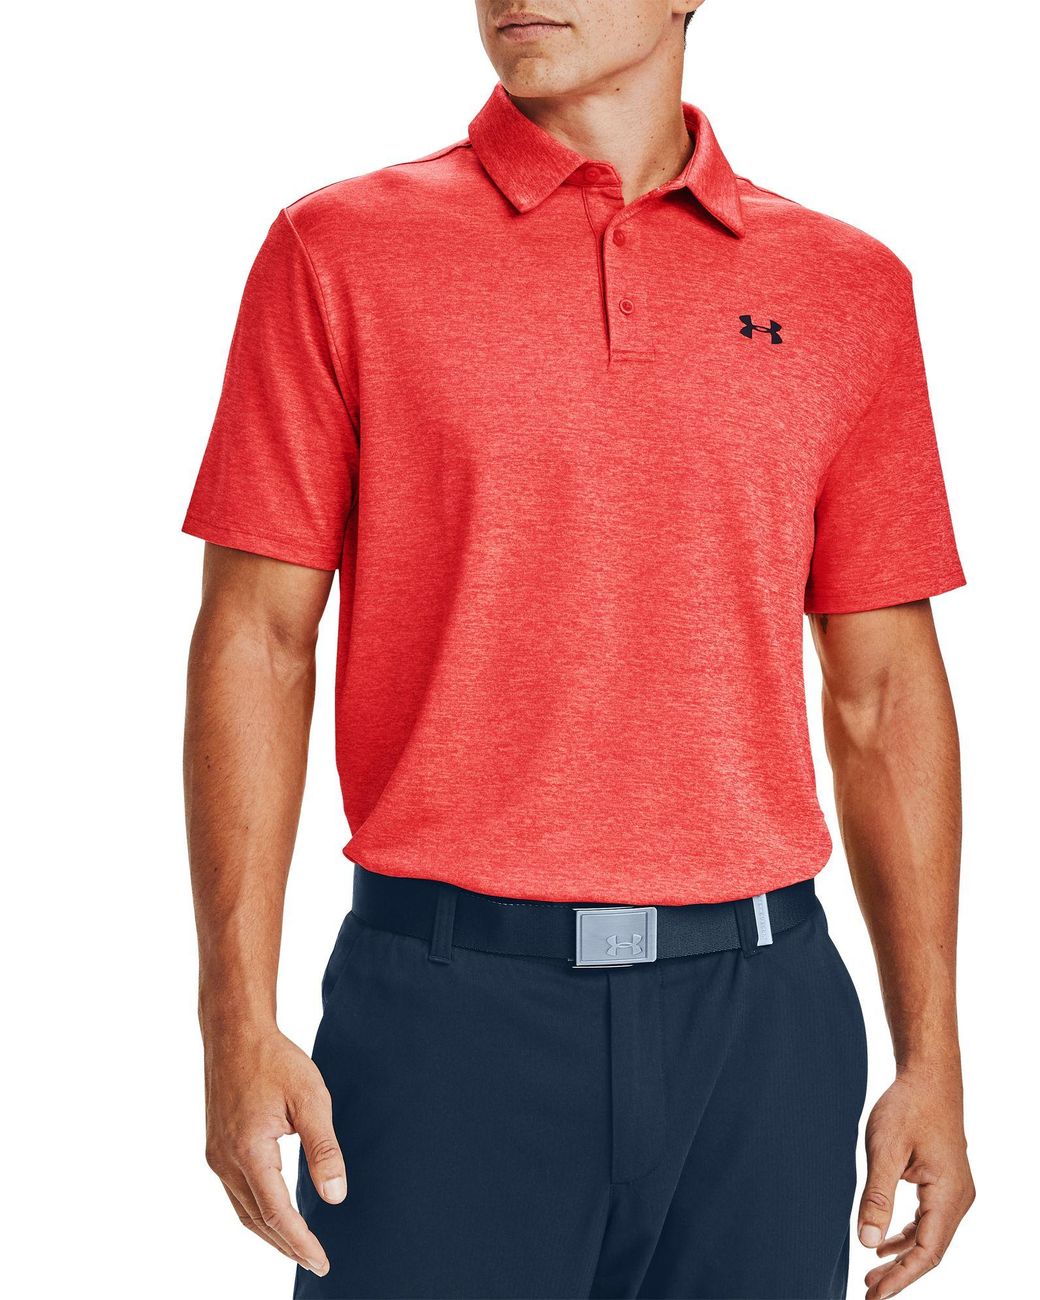 Under Armour Playoff 2.0 Golf Polo in Red for Men - Lyst